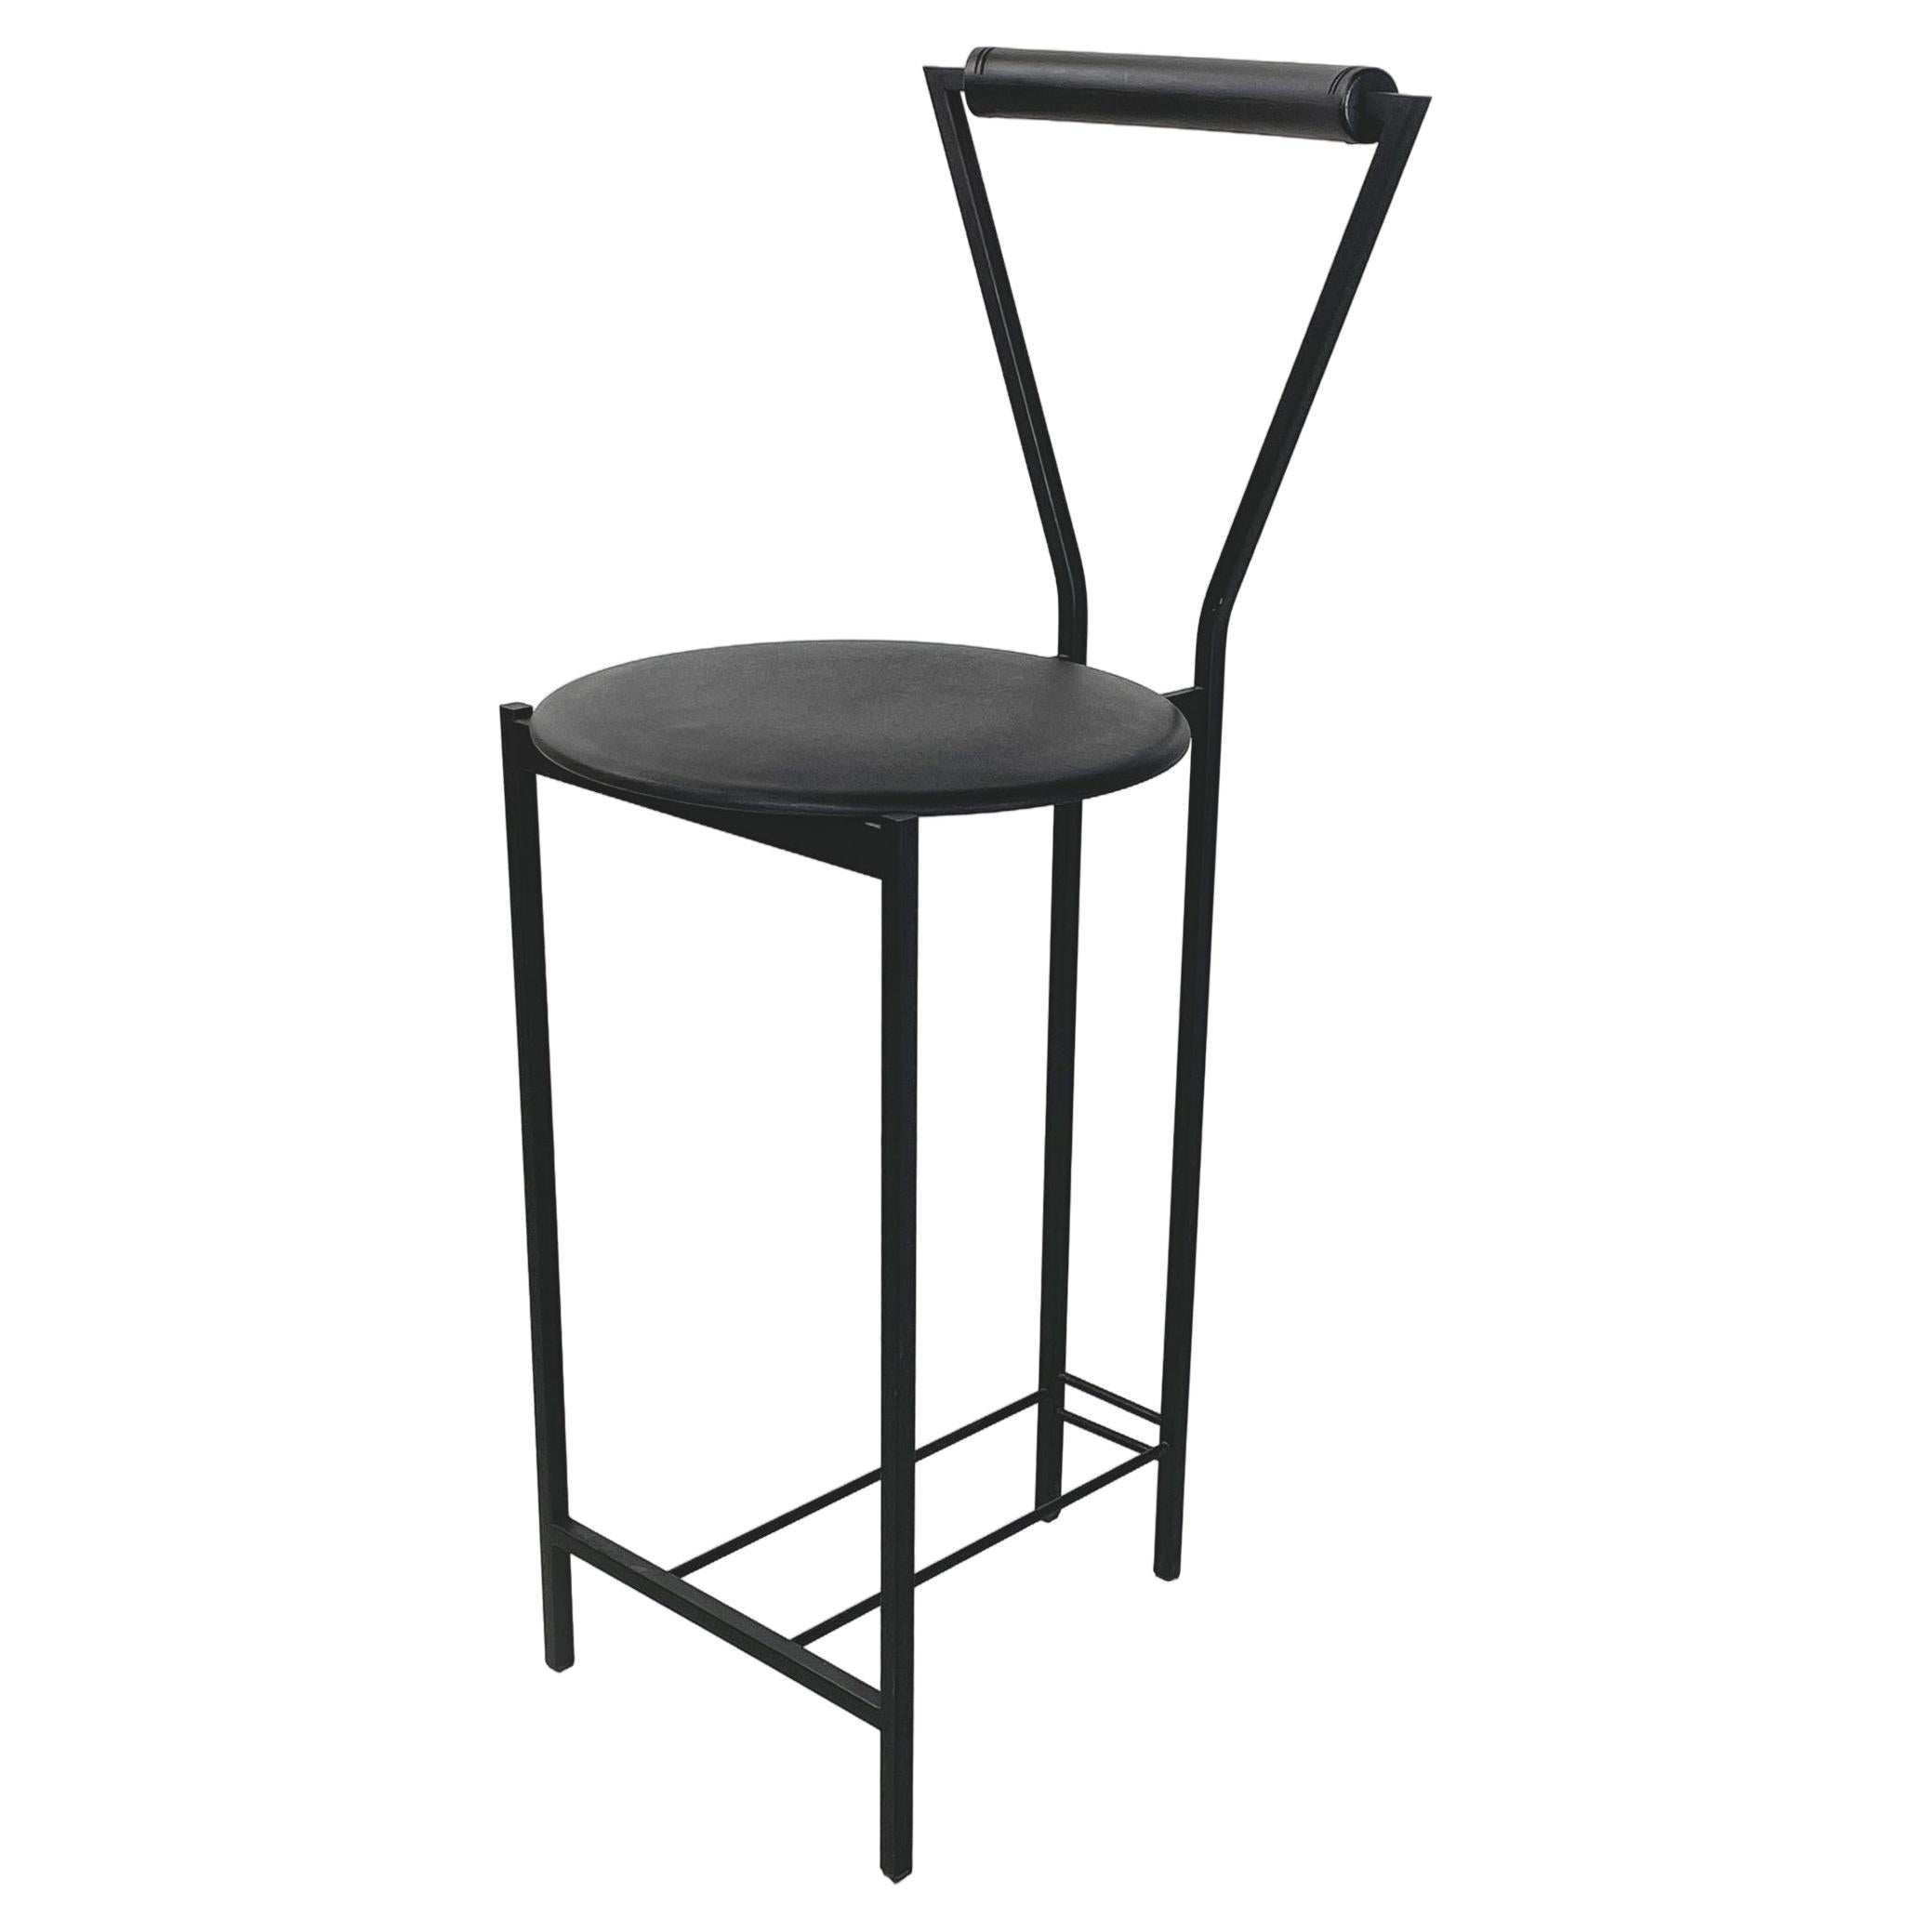 Italian modern high stool in black metal and rubber, 1980s For Sale